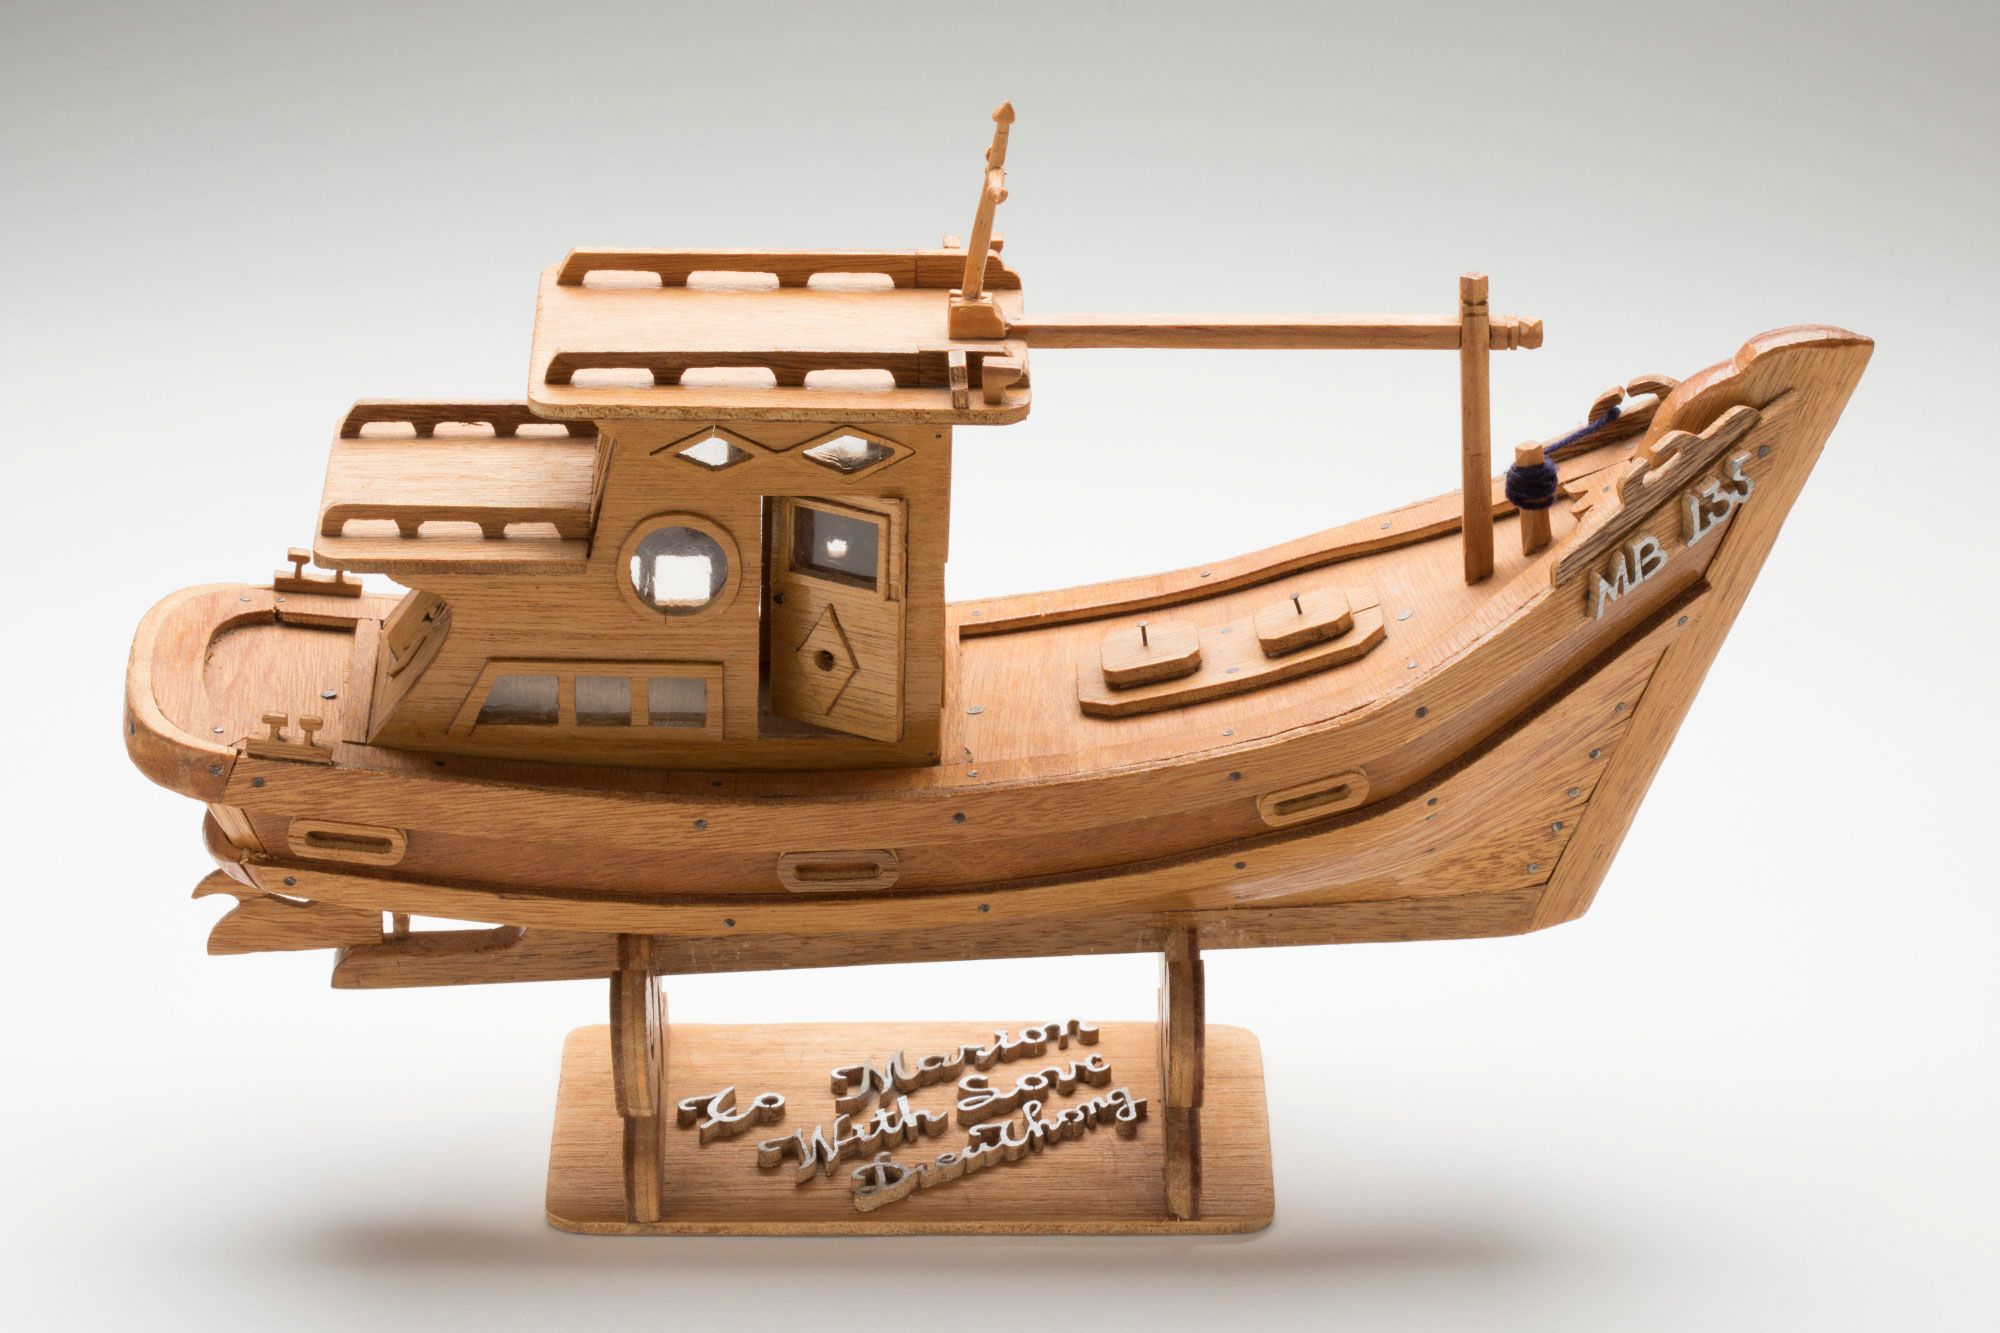 Small wooden replica of Vietnamese refugee boat number MB135.